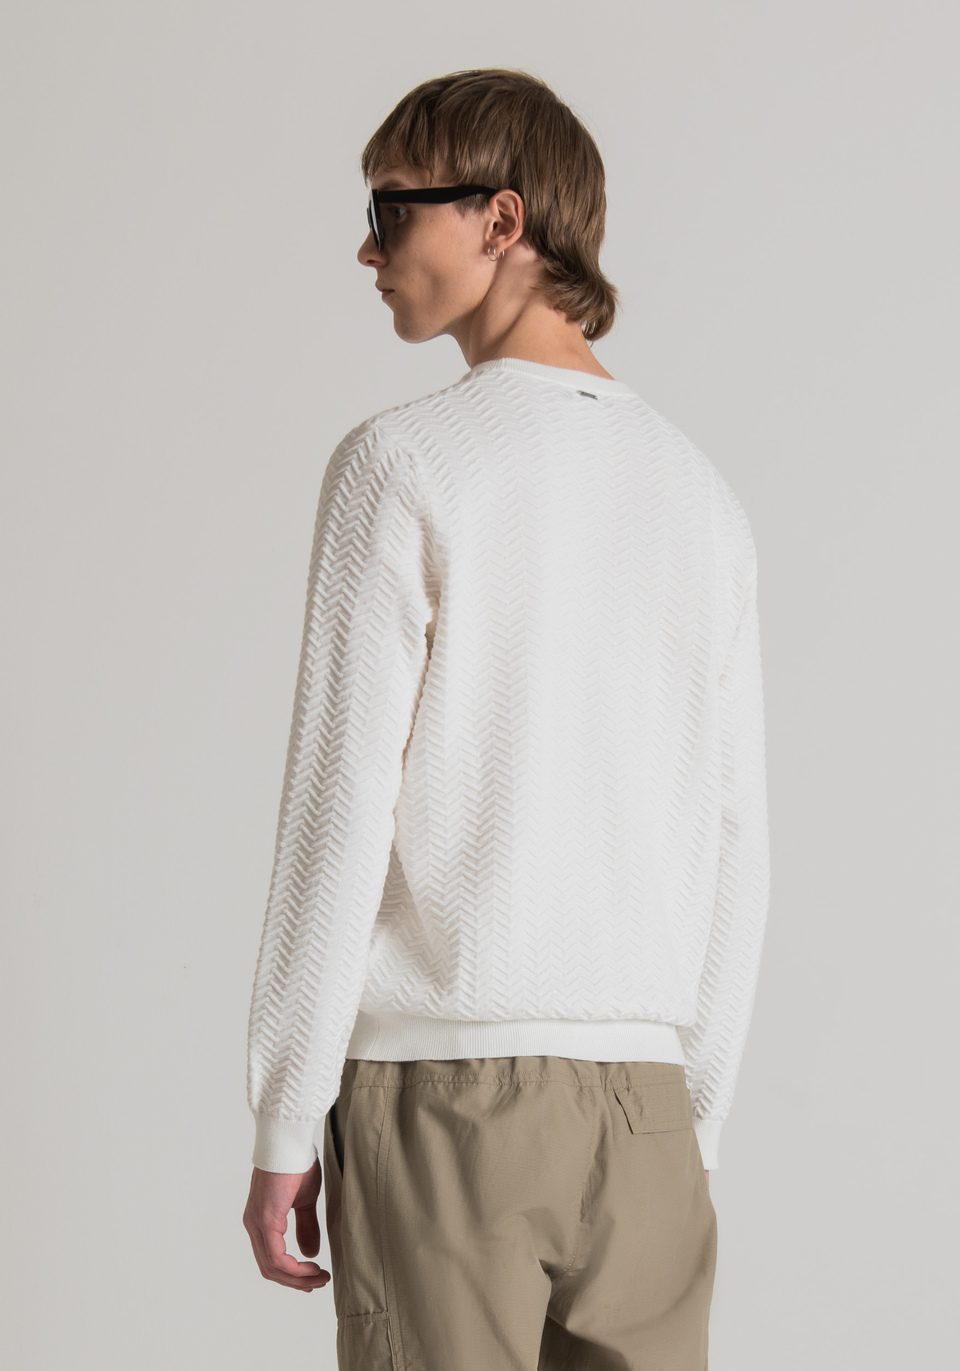 SLIM-FIT SWEATER IN COTTON YARN WITH JACQUARD PATTERN - Antony Morato Online Shop